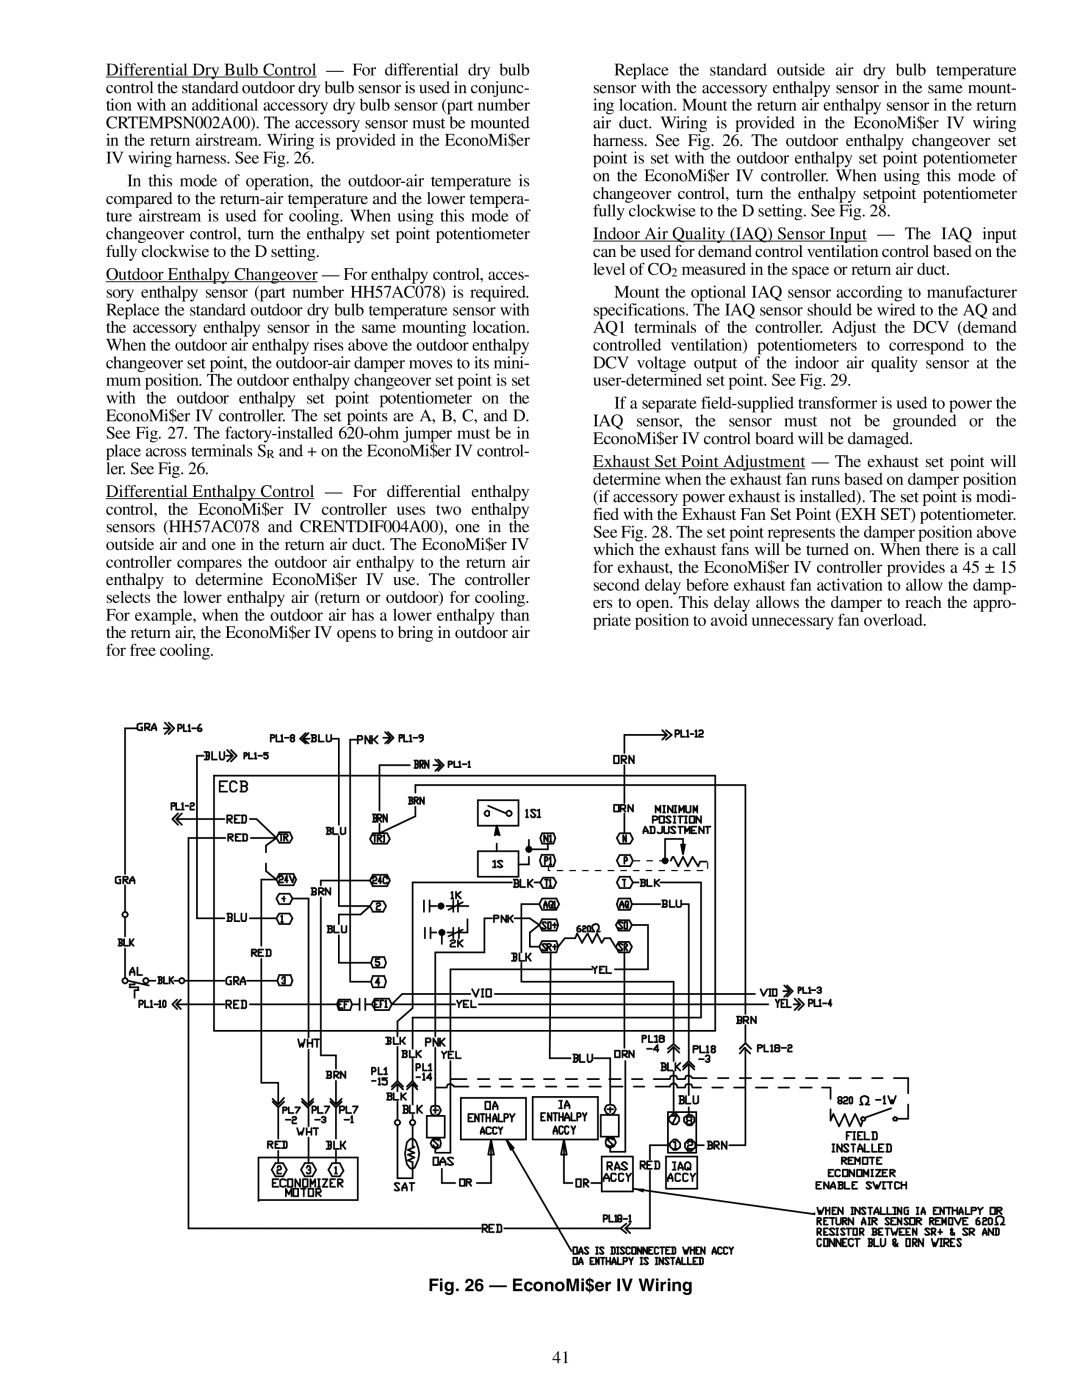 Carrier 48PG20-28 specifications EconoMi$er IV Wiring 